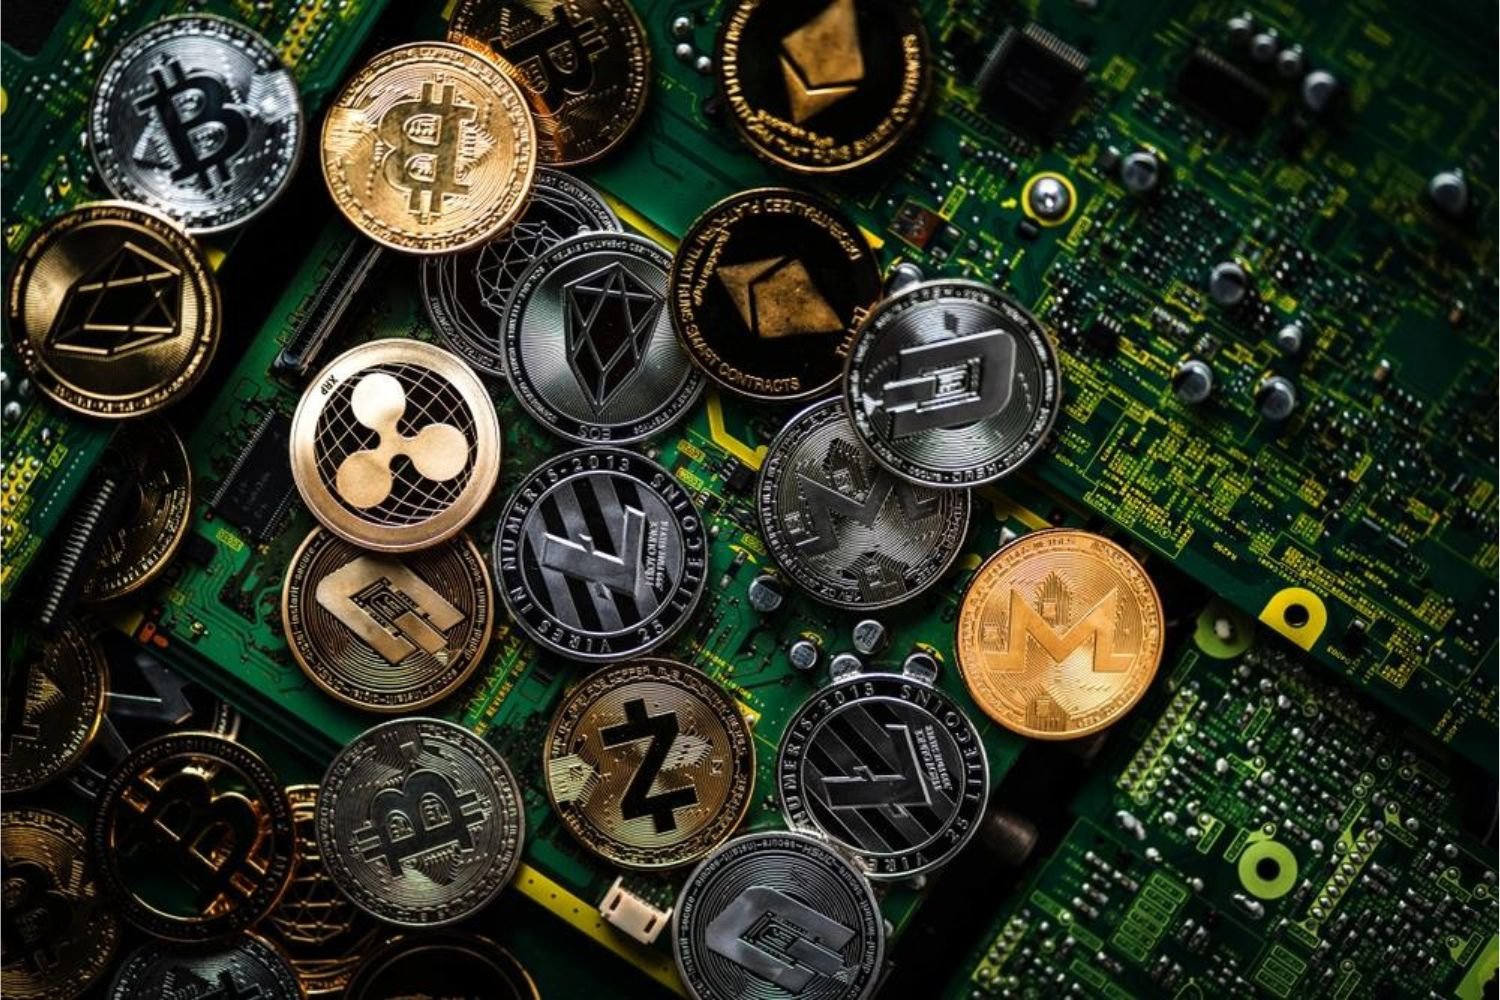 Cryptocurrencies are gaining ground across Africa – here’s why that’s both good news and bad